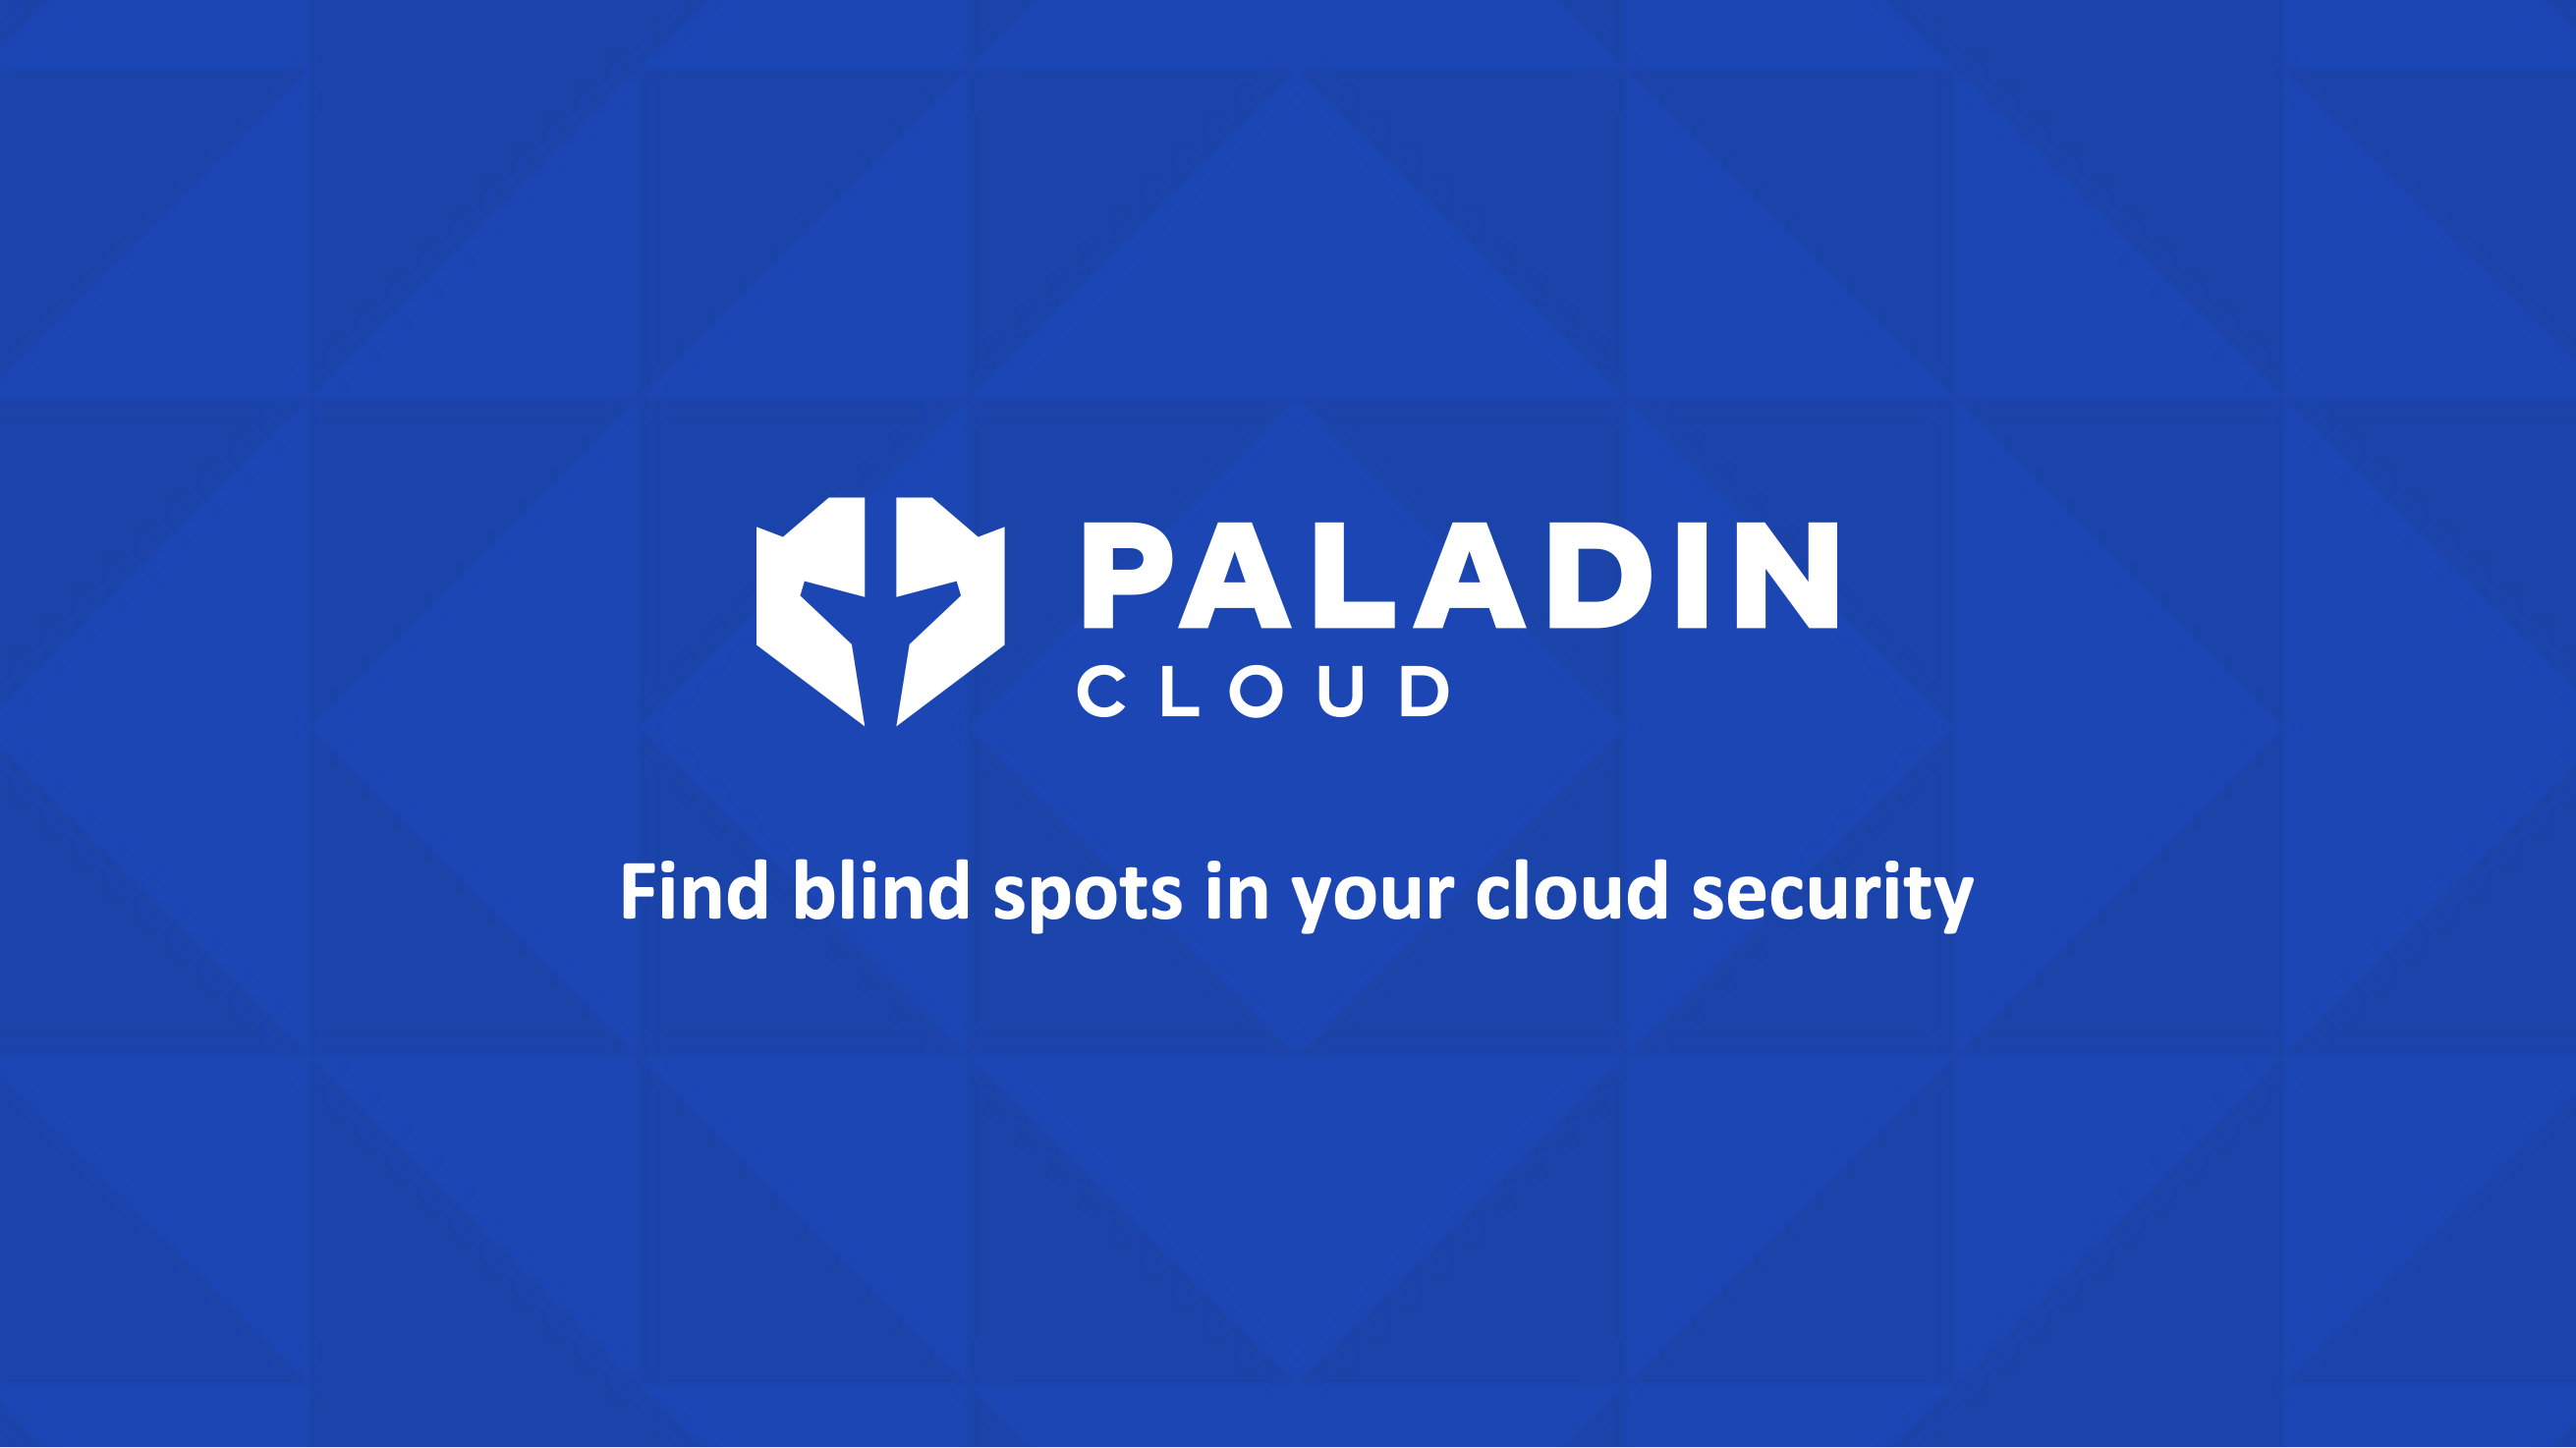 The Paladin Cloud logo on a blue background. The byline underneath says Find blind spots in your cloud security